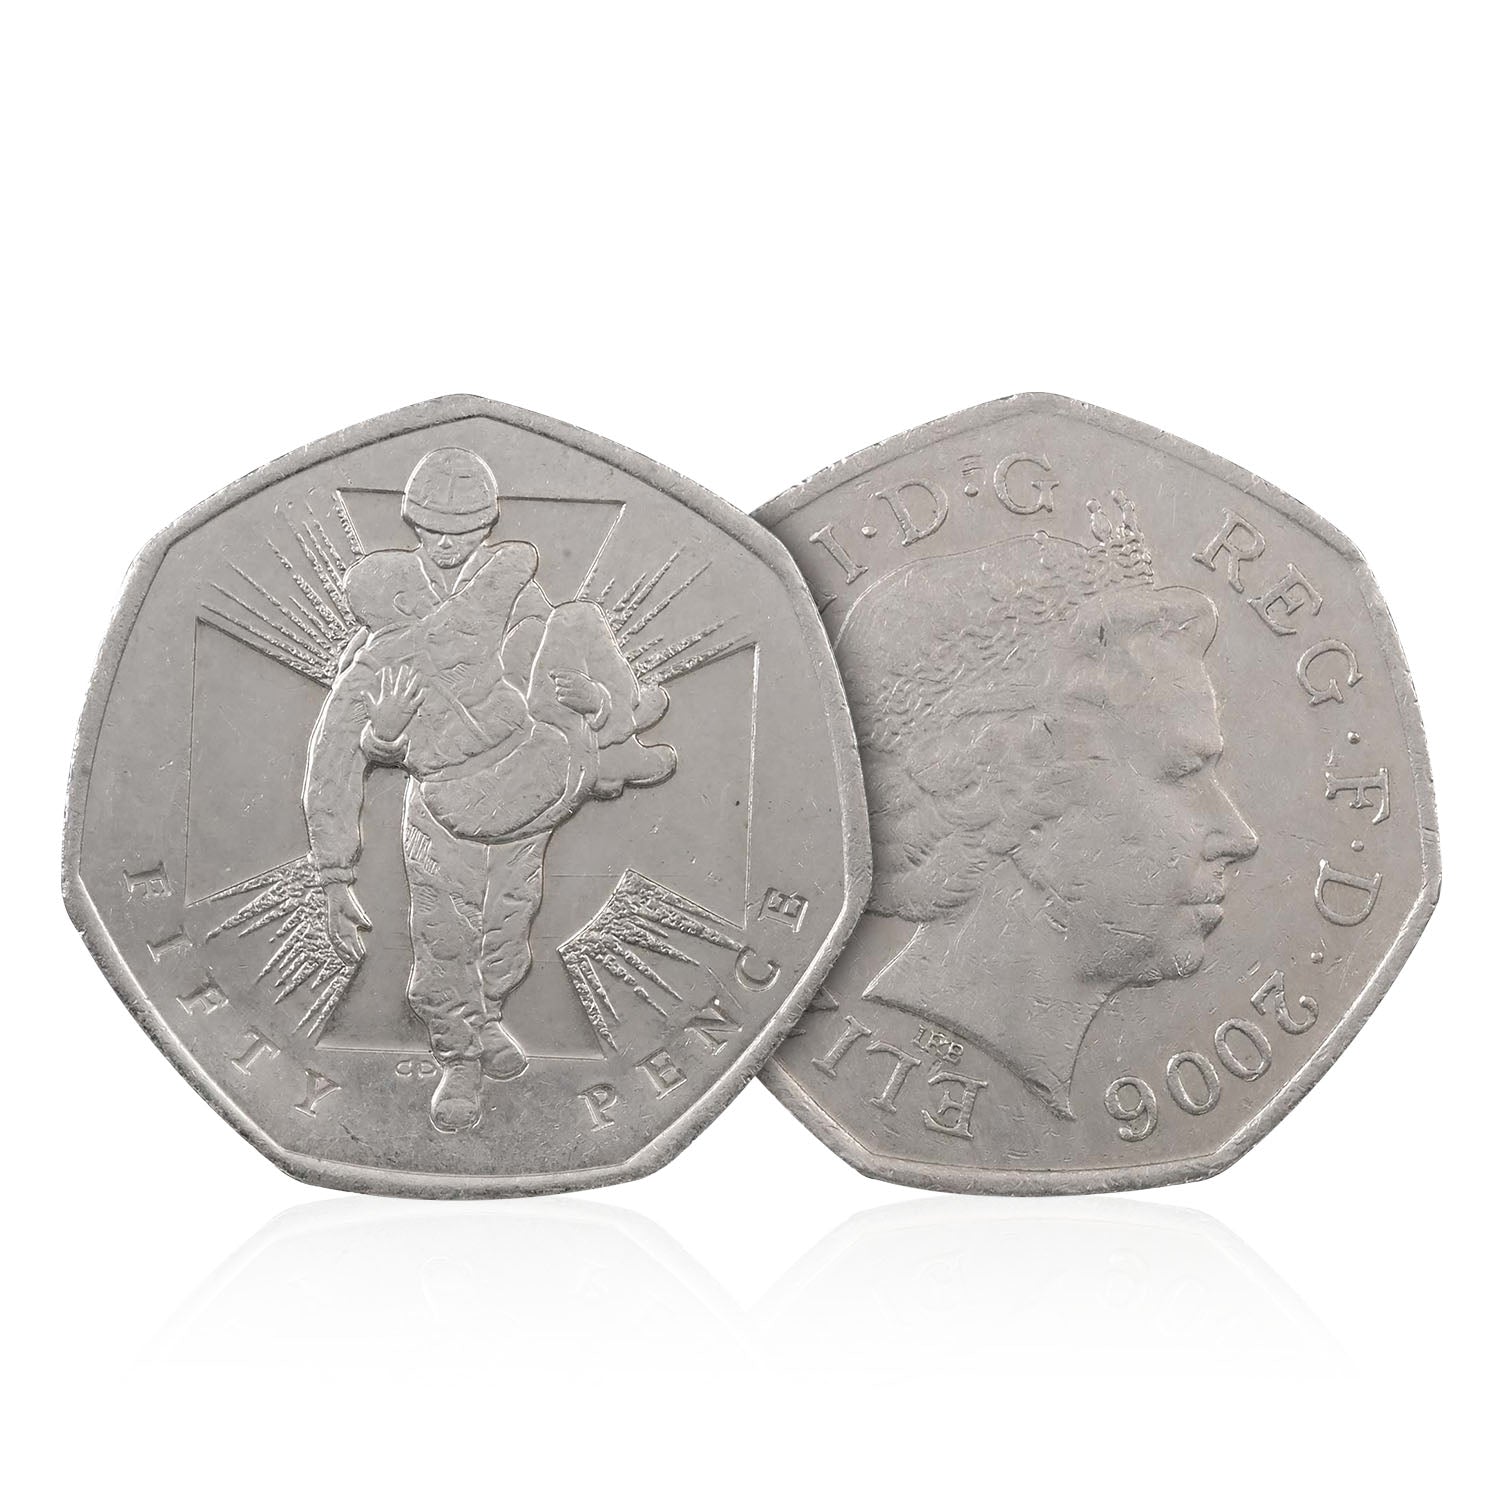 2006 Circulated 150th Anniversary of VICTORIA CROSS 50p coin